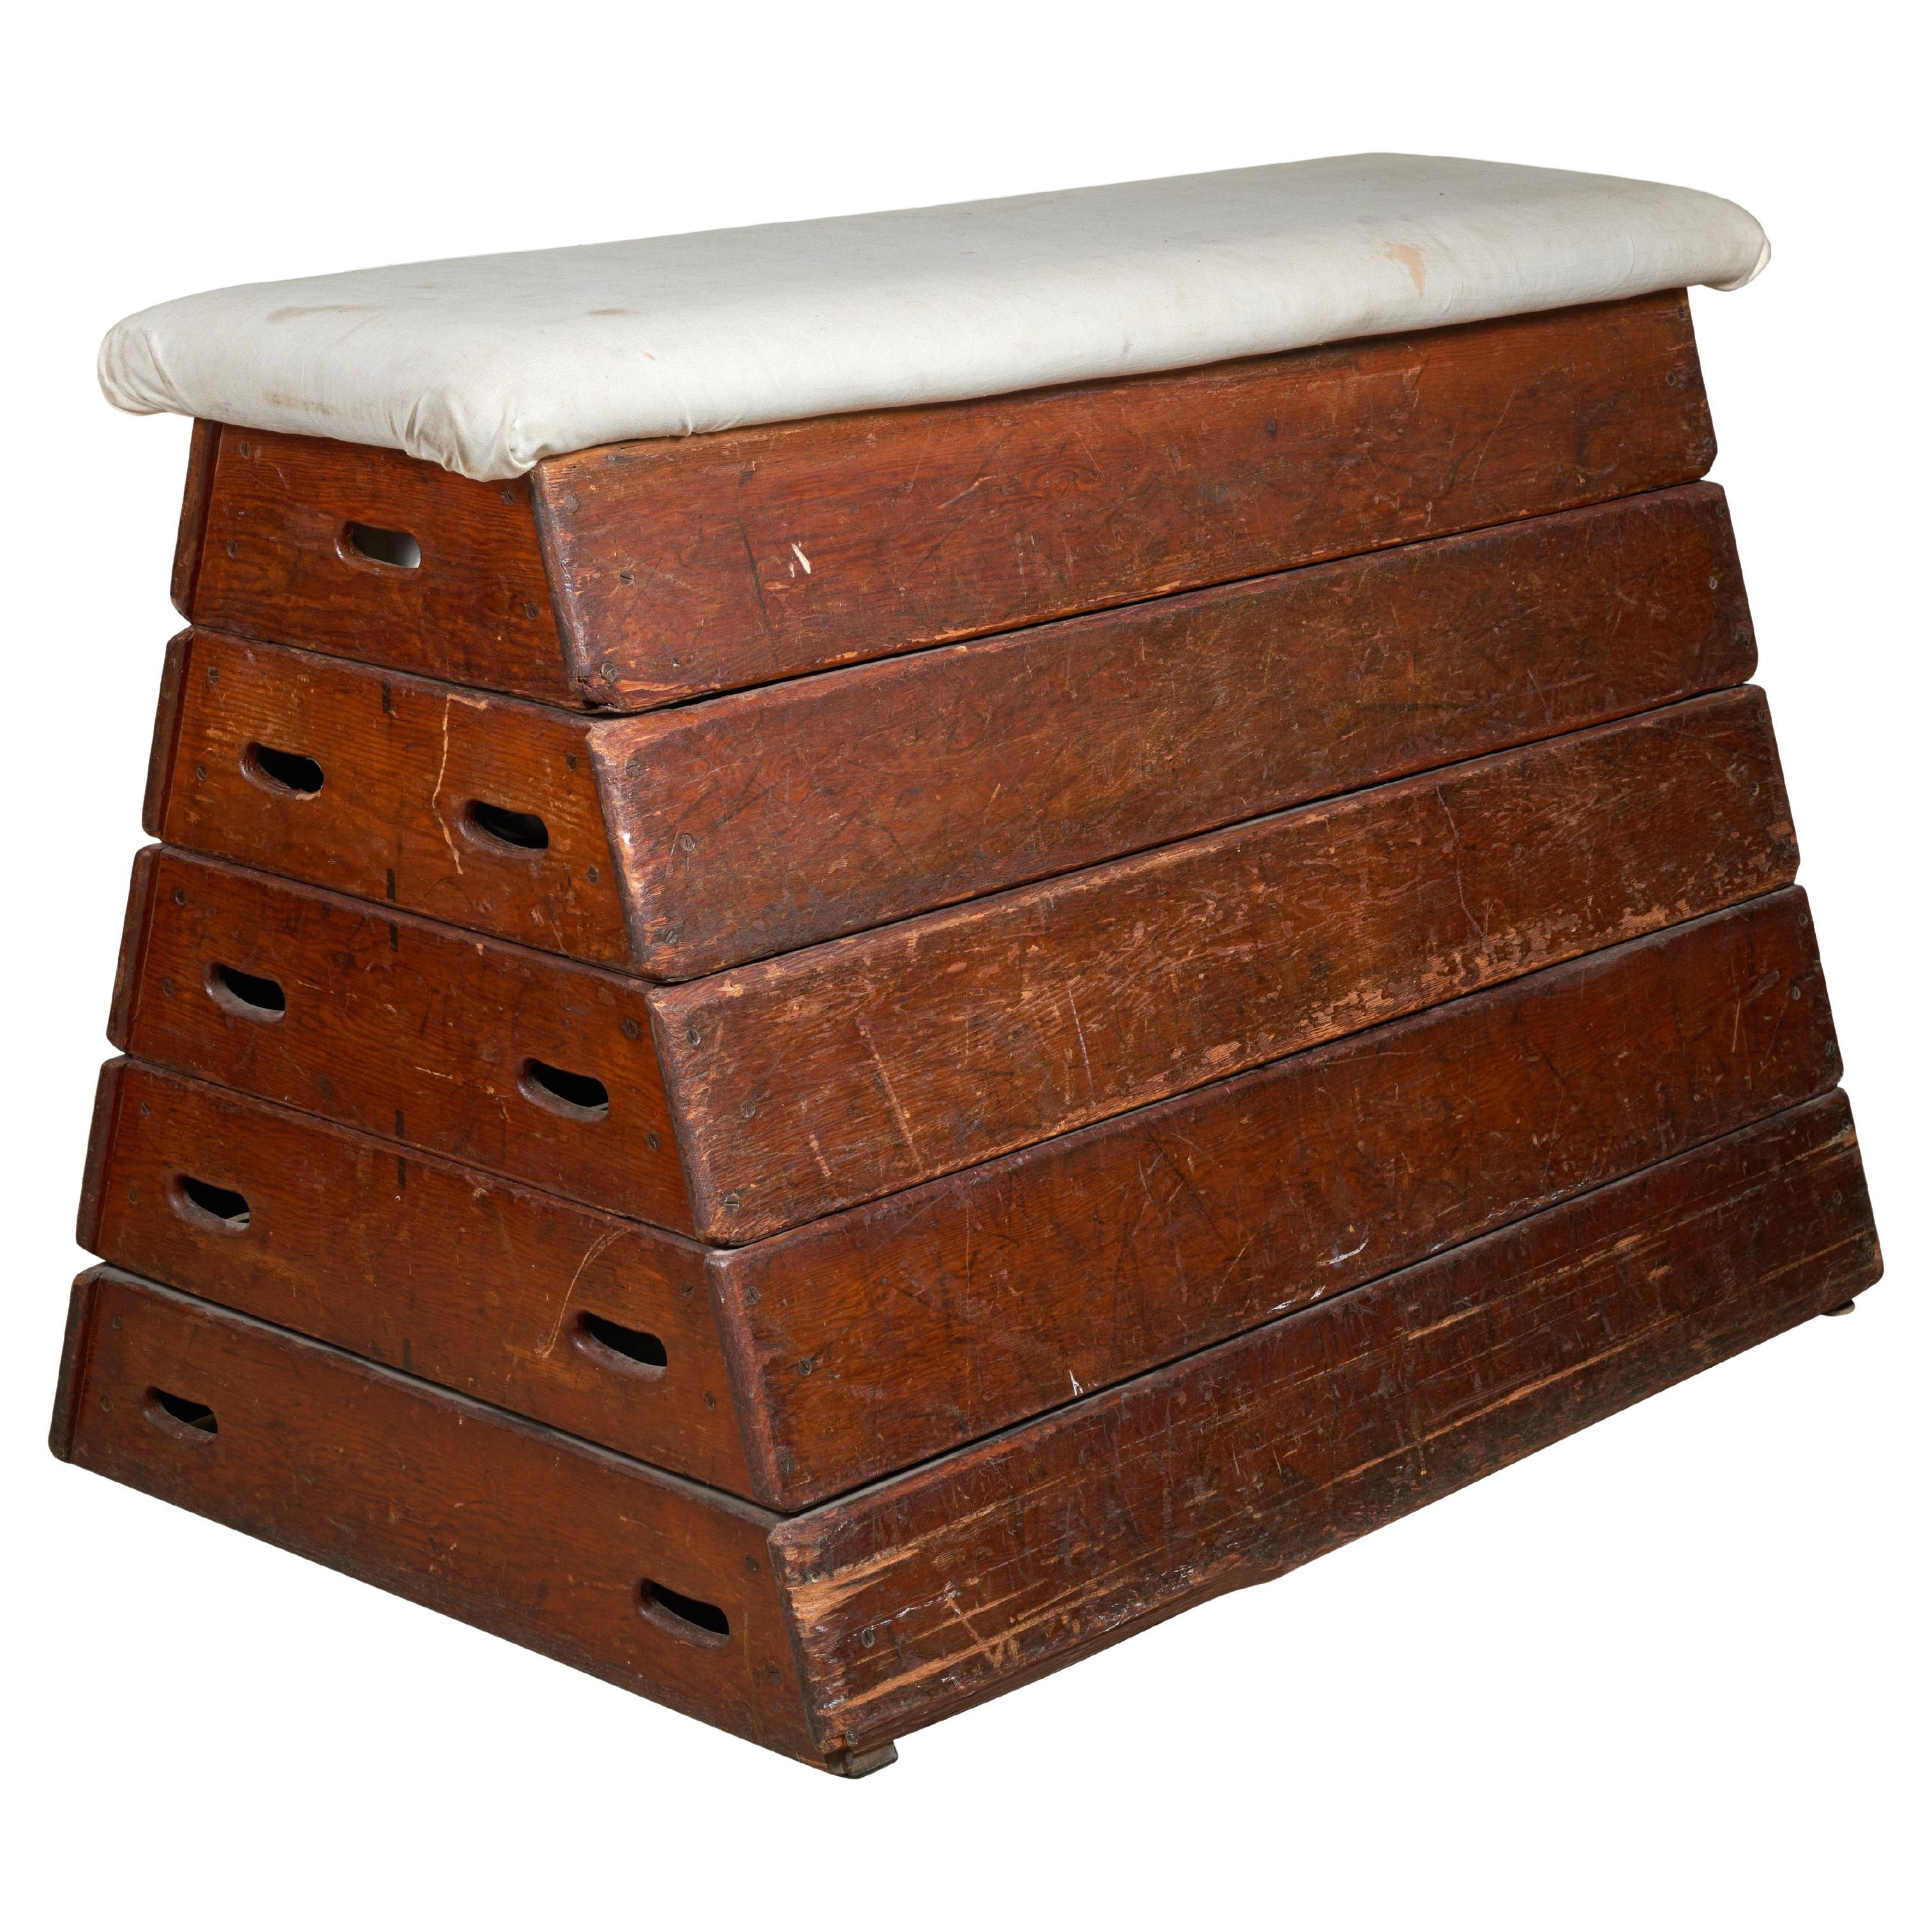 Five Tier Vaulting Box with Upholstered Top For Sale